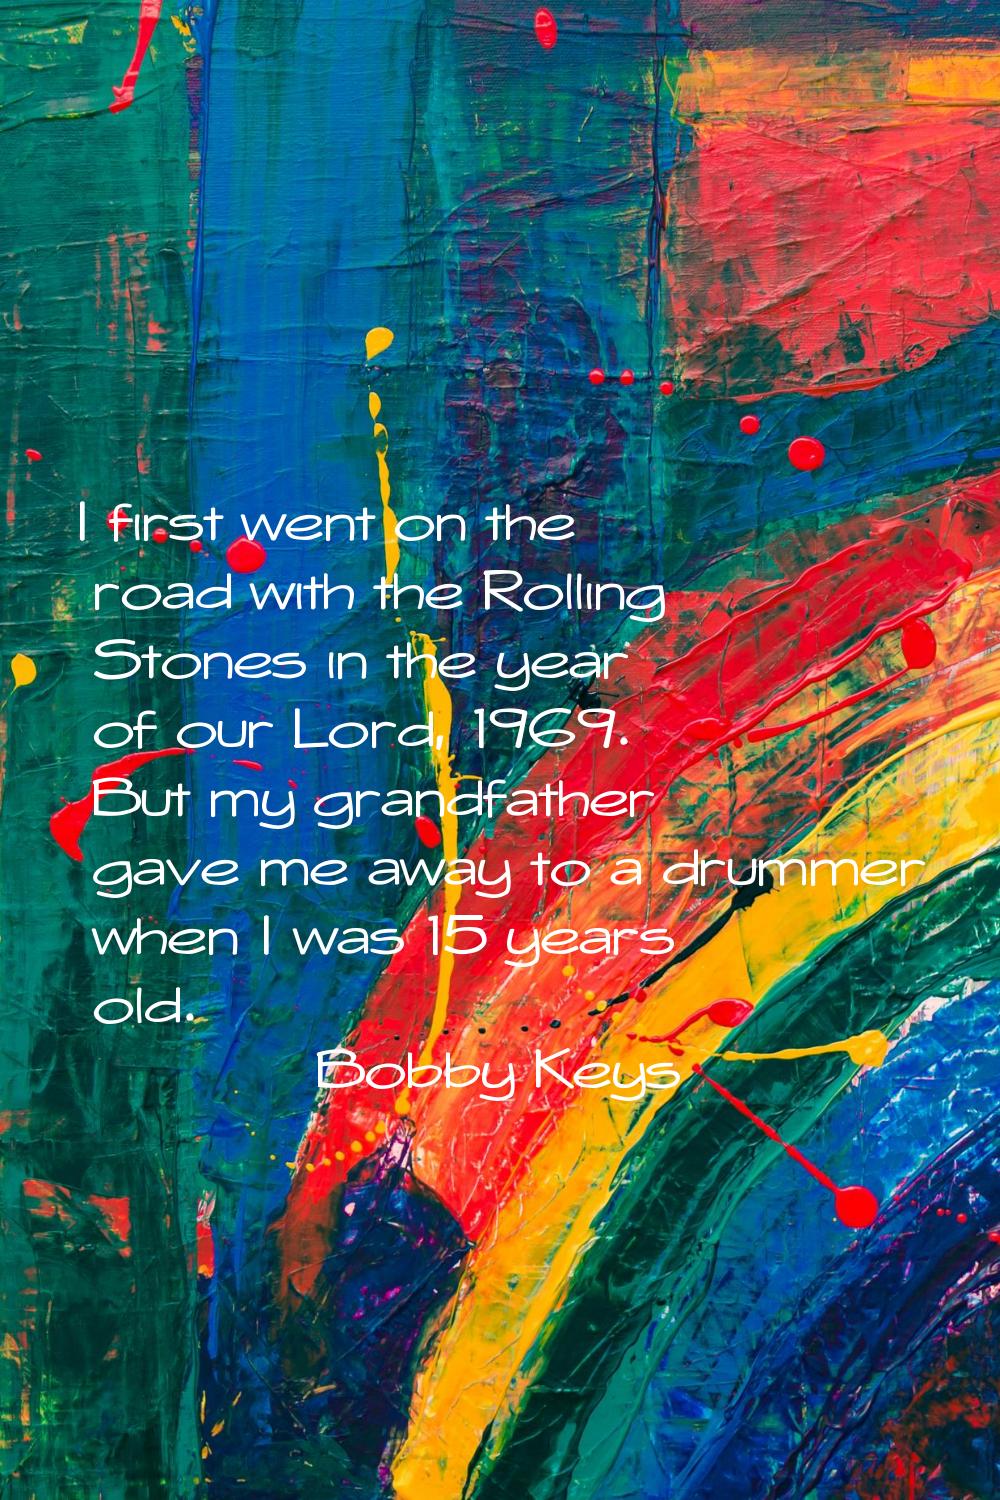 I first went on the road with the Rolling Stones in the year of our Lord, 1969. But my grandfather 